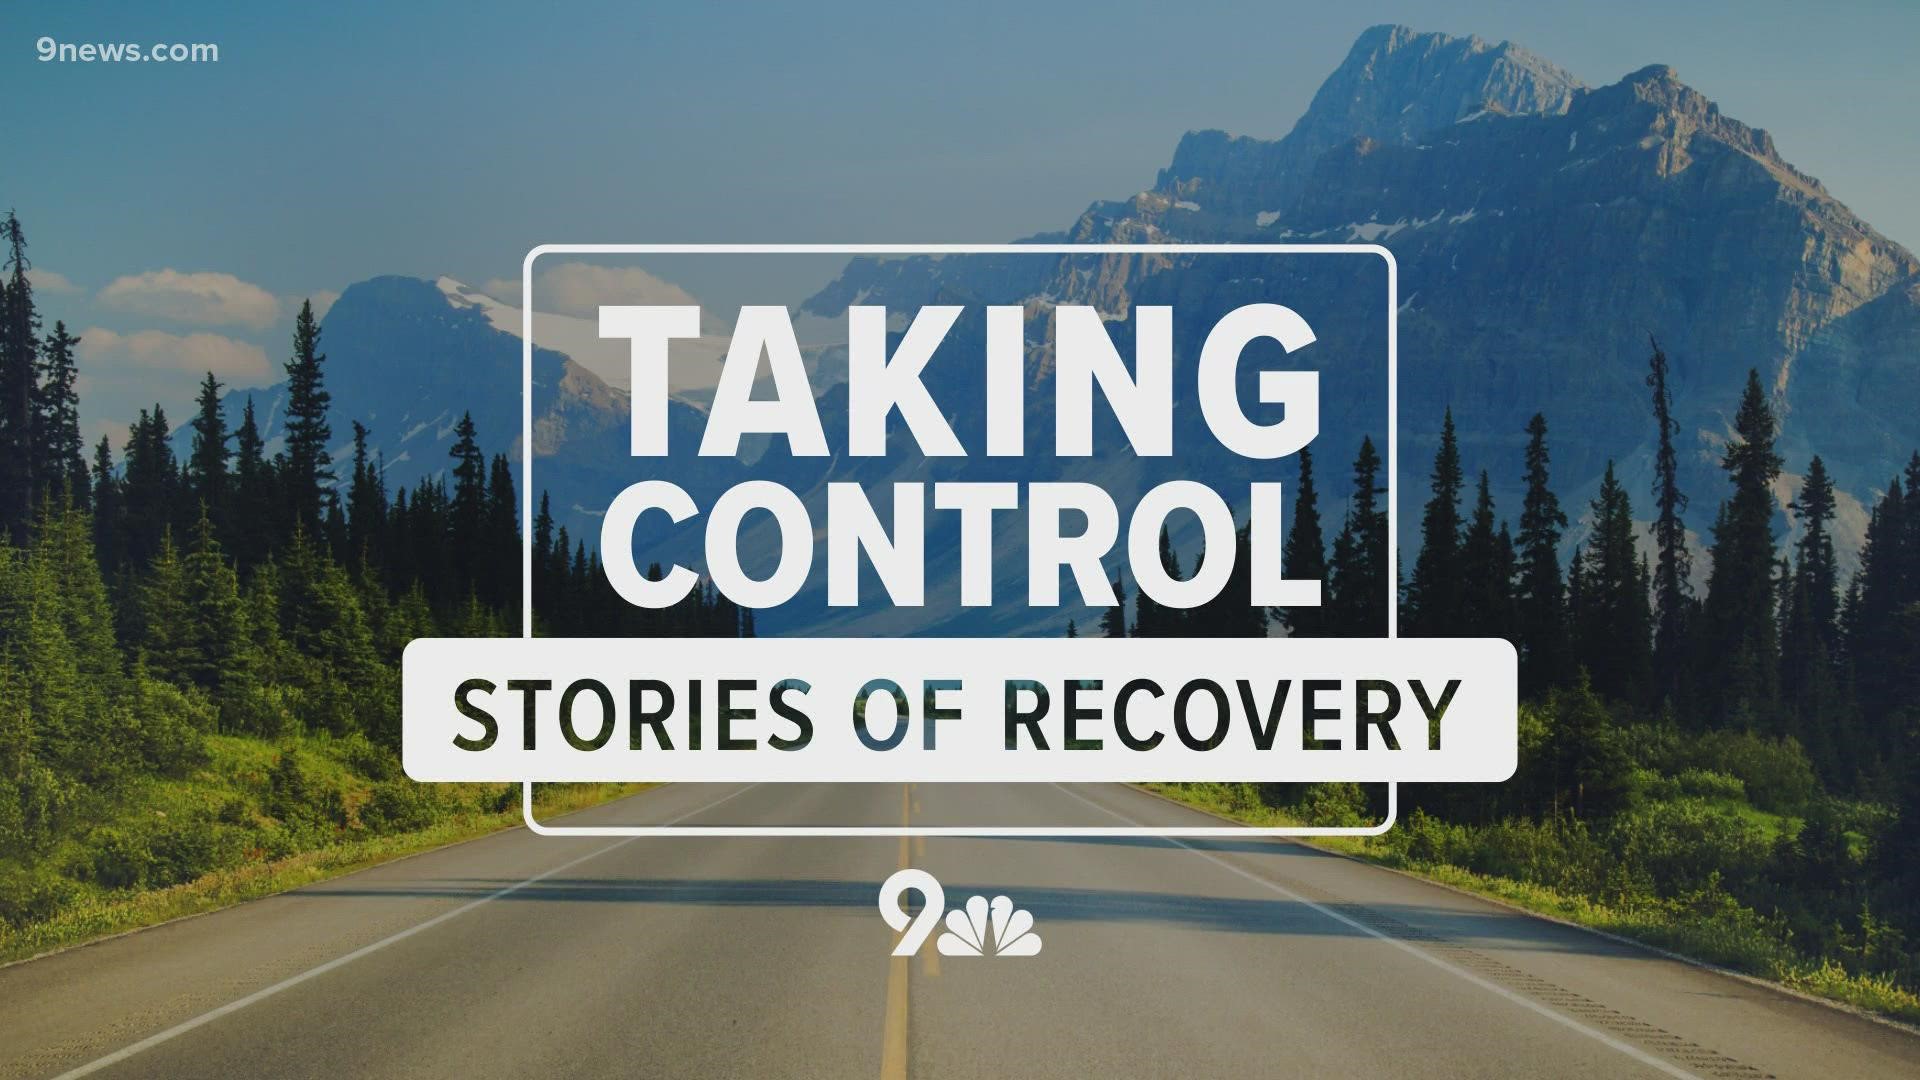 For National Recovery Month in September, we're talking about addiction recovery.